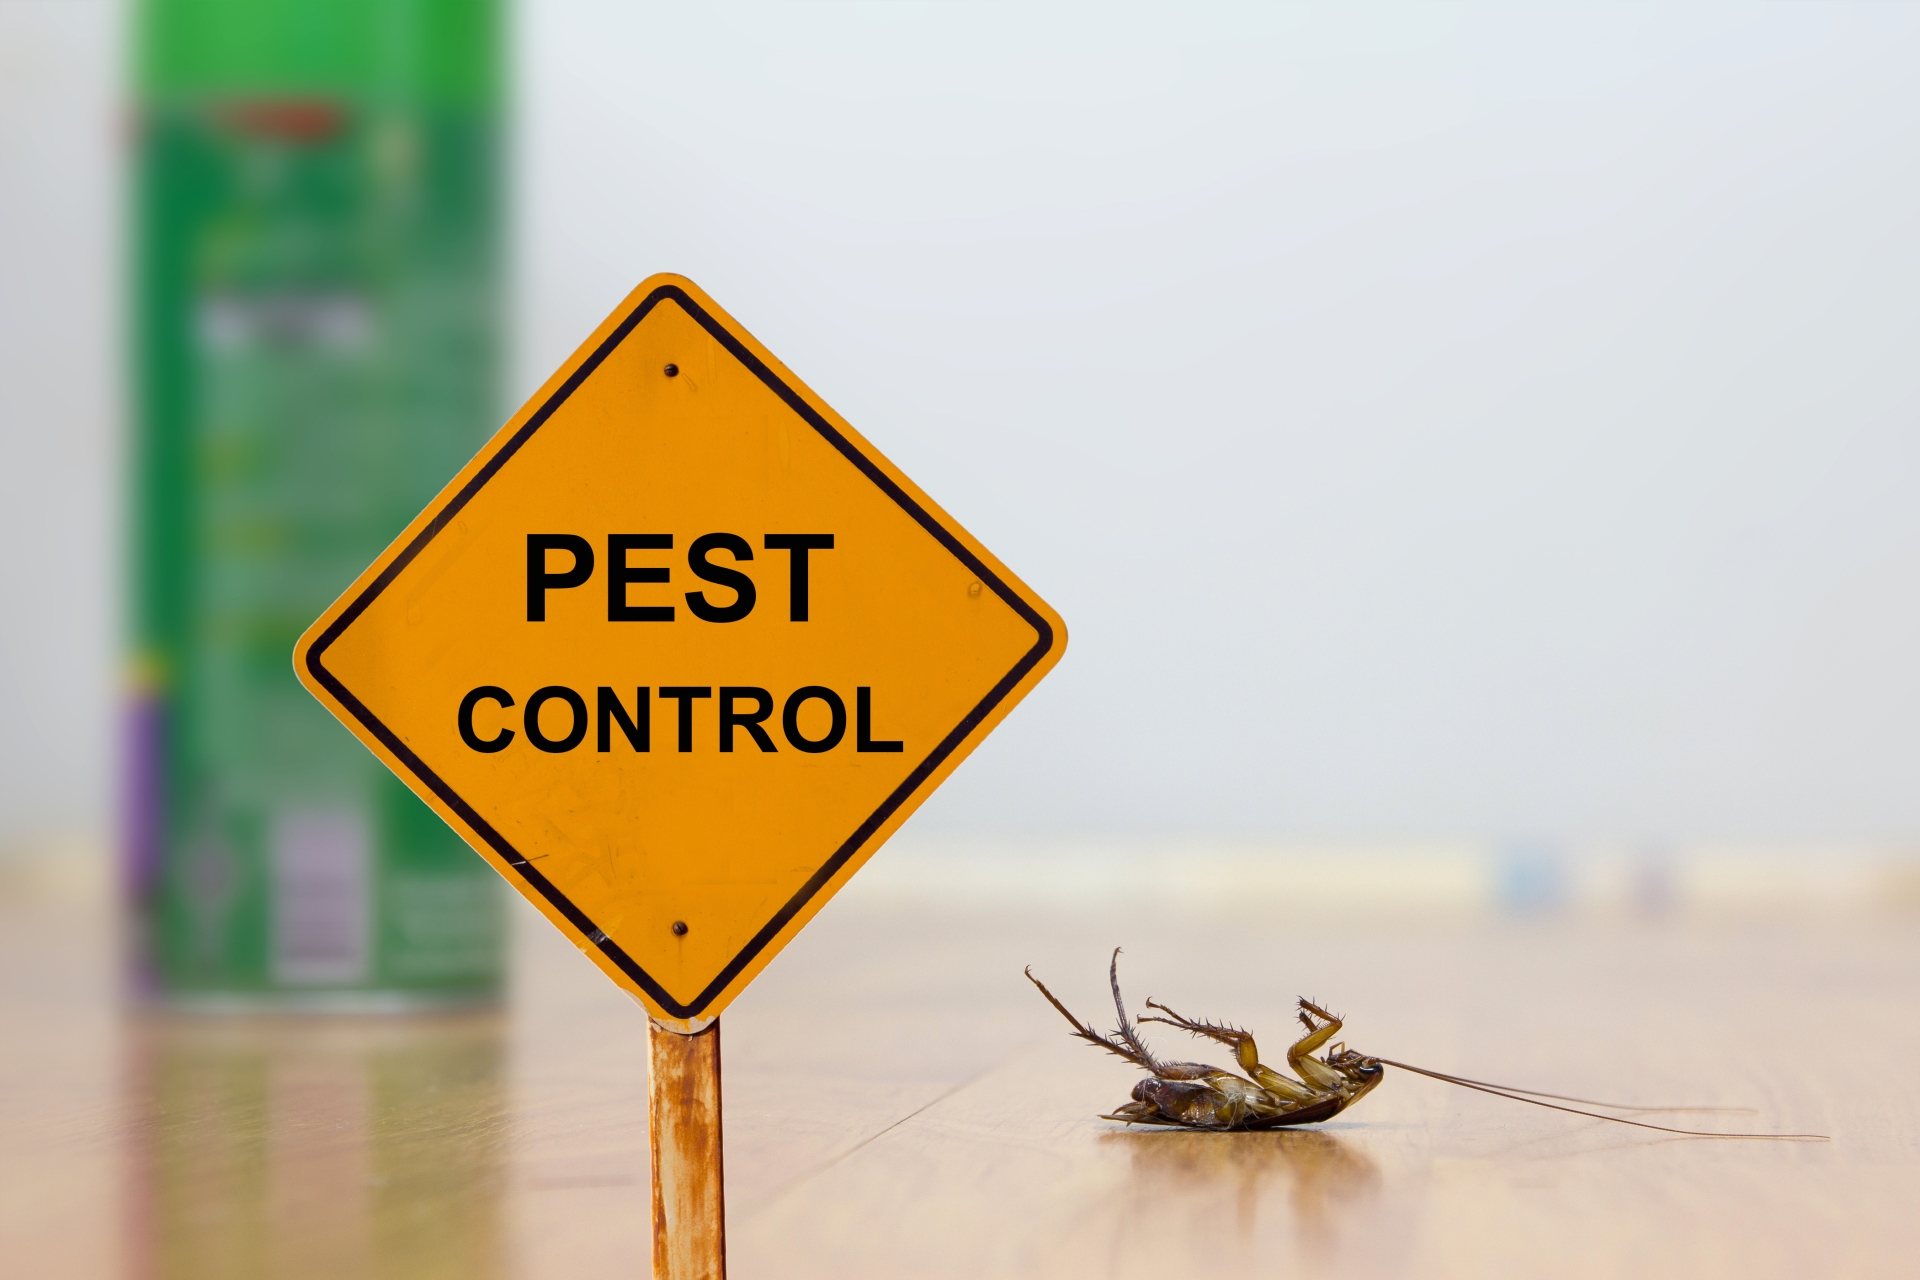 24 Hour Pest Control, Pest Control in Barkingside, Hainault, IG6. Call Now 020 8166 9746